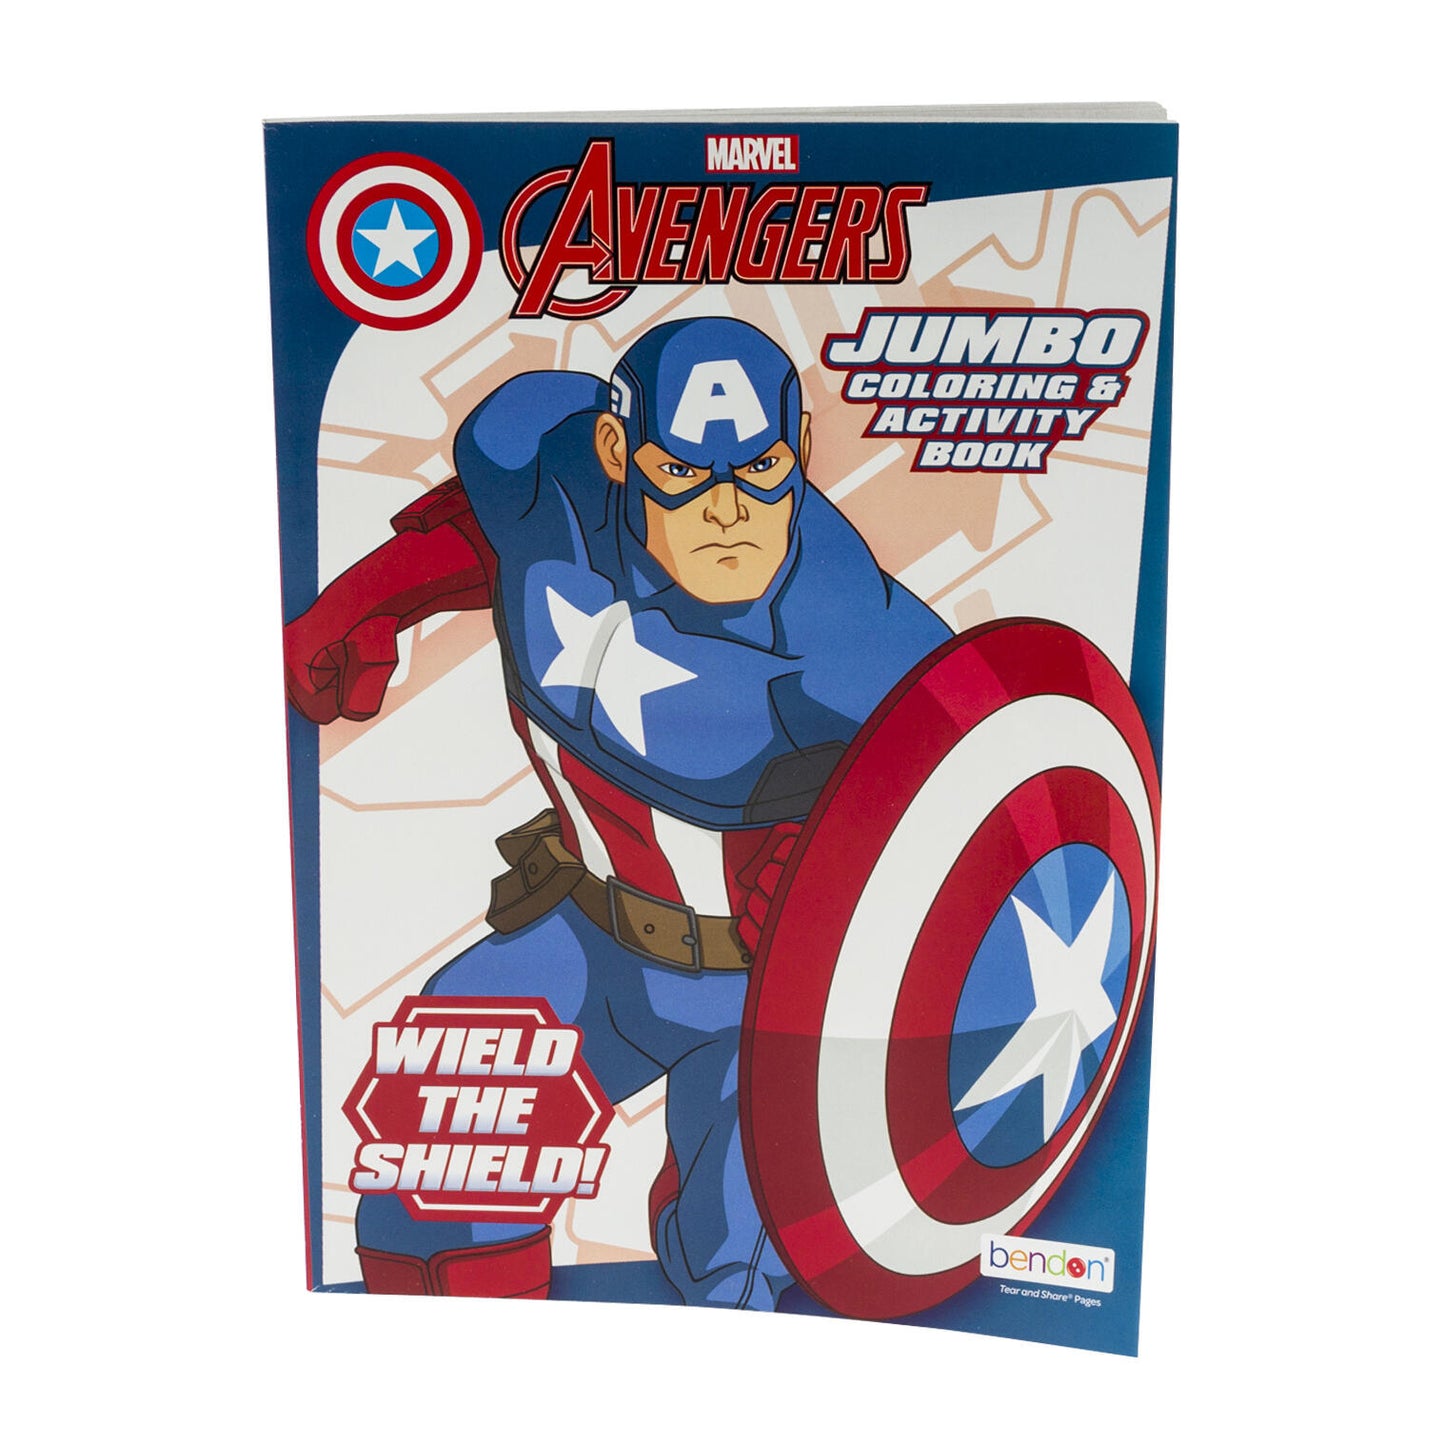 The Avengers Jumbo Coloring & Activity Book